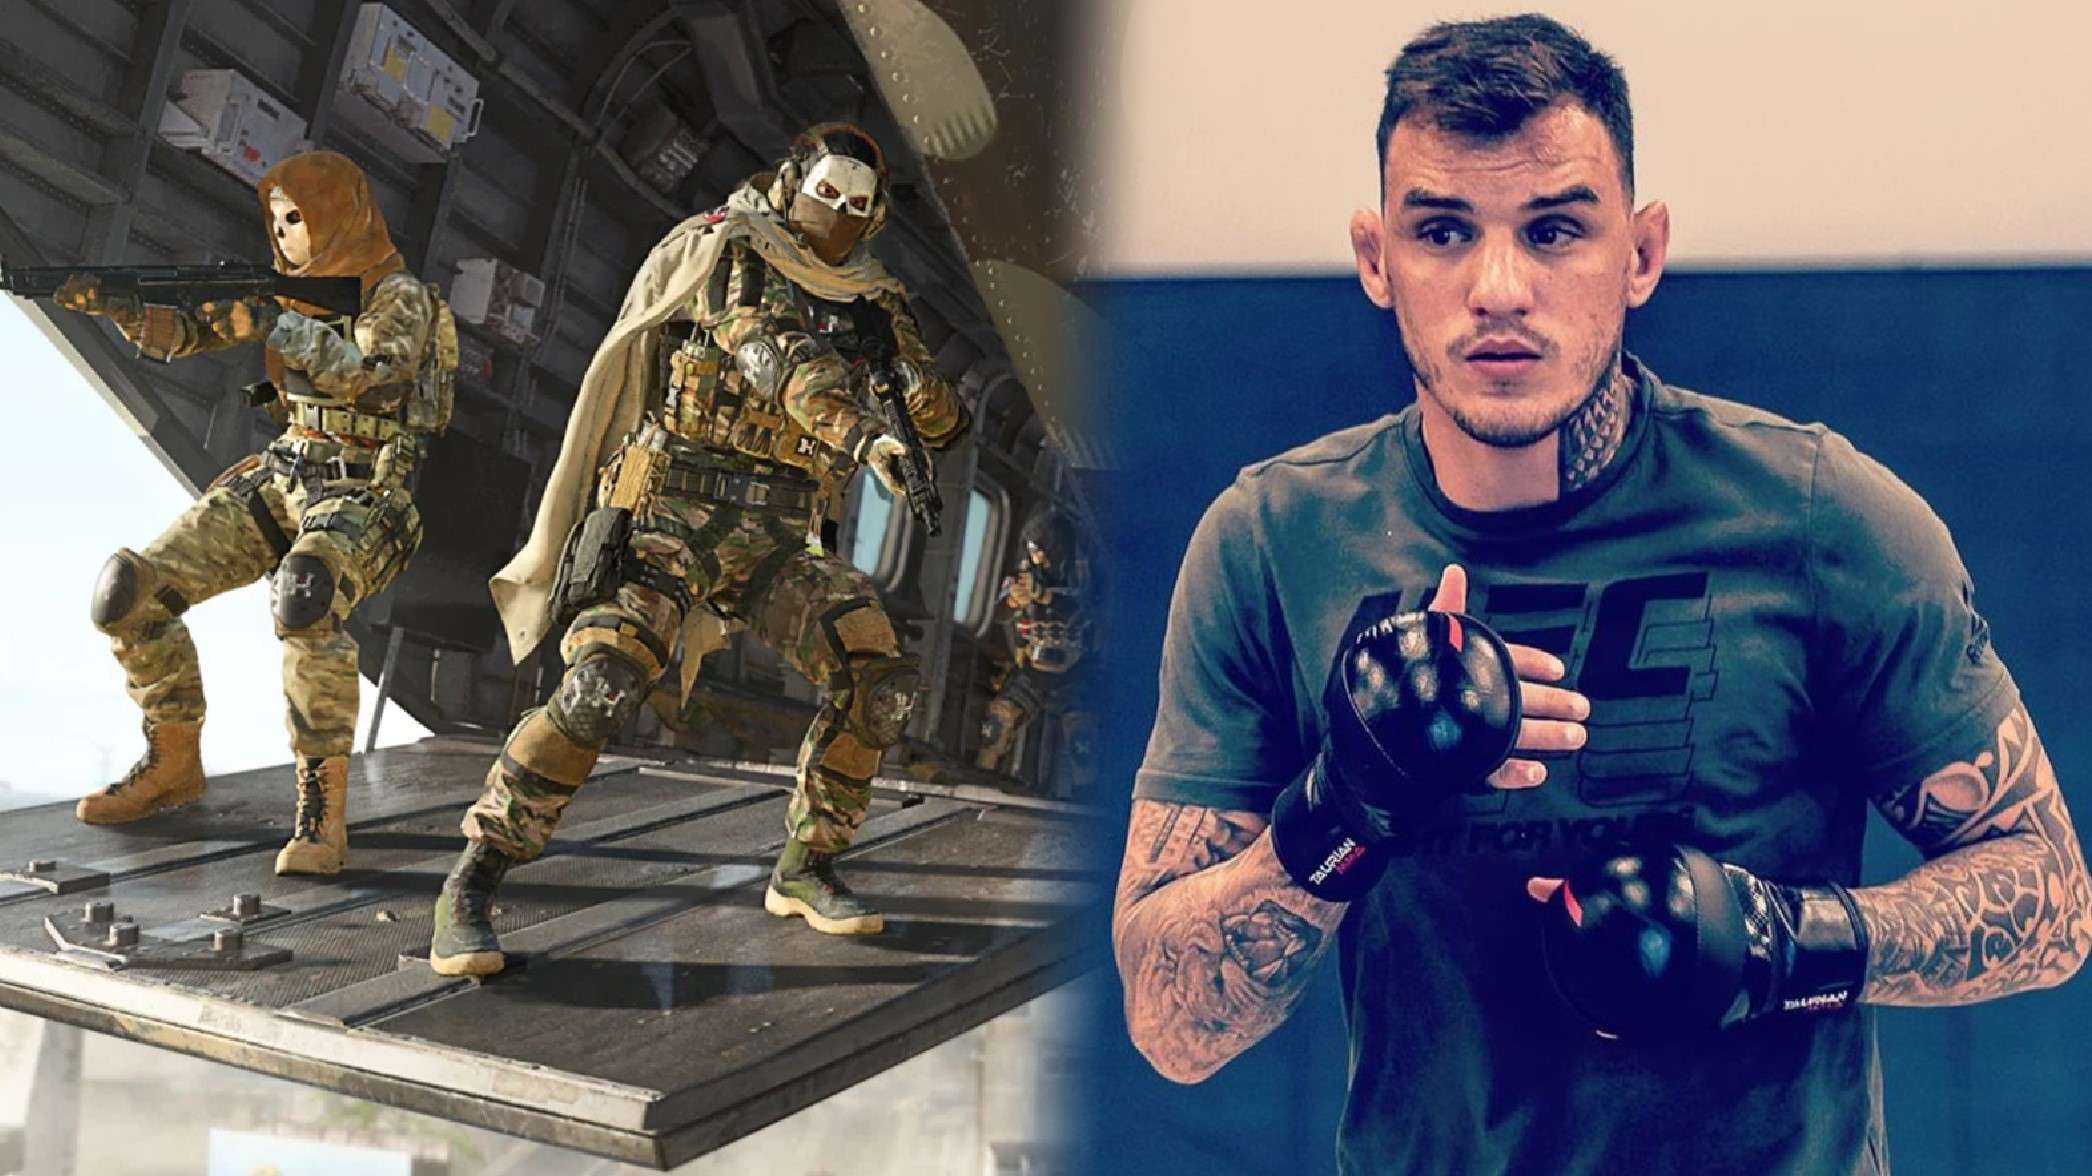 Call of Duty gameplay next to UFC fighter Renato Moicano